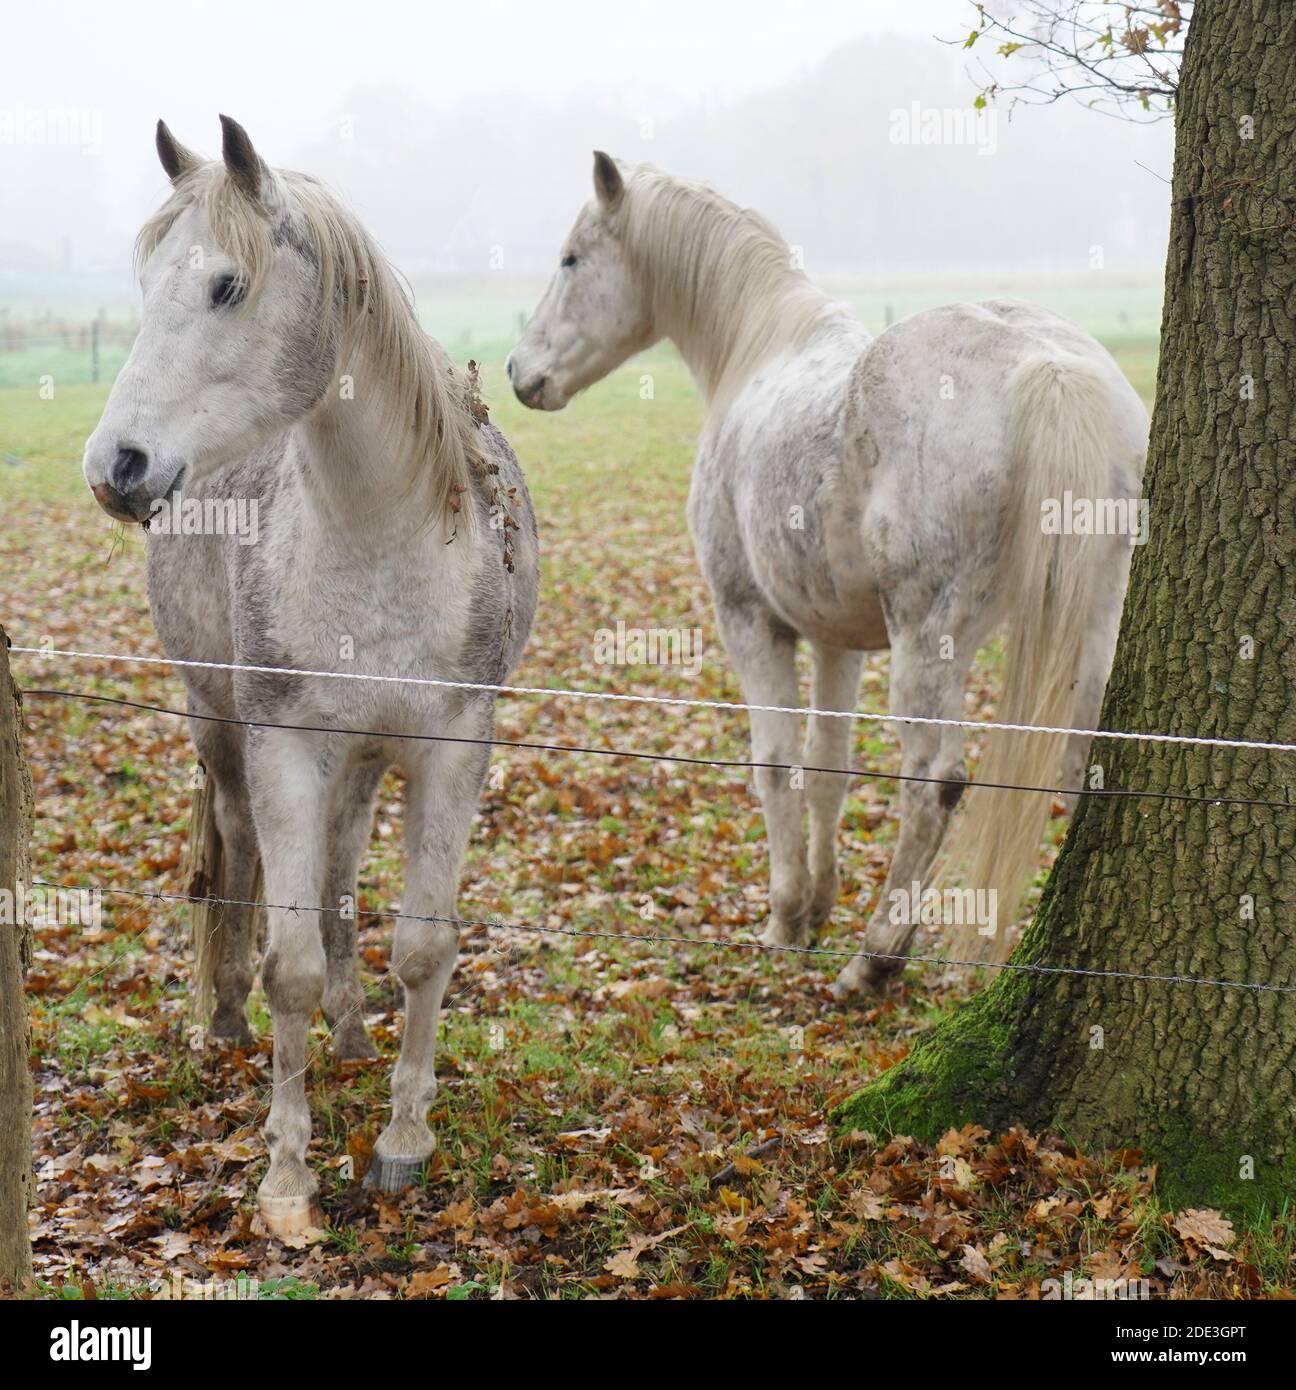 Two curious white horses on a foggy day. They look like horses from a fairy tale. Stock Photo